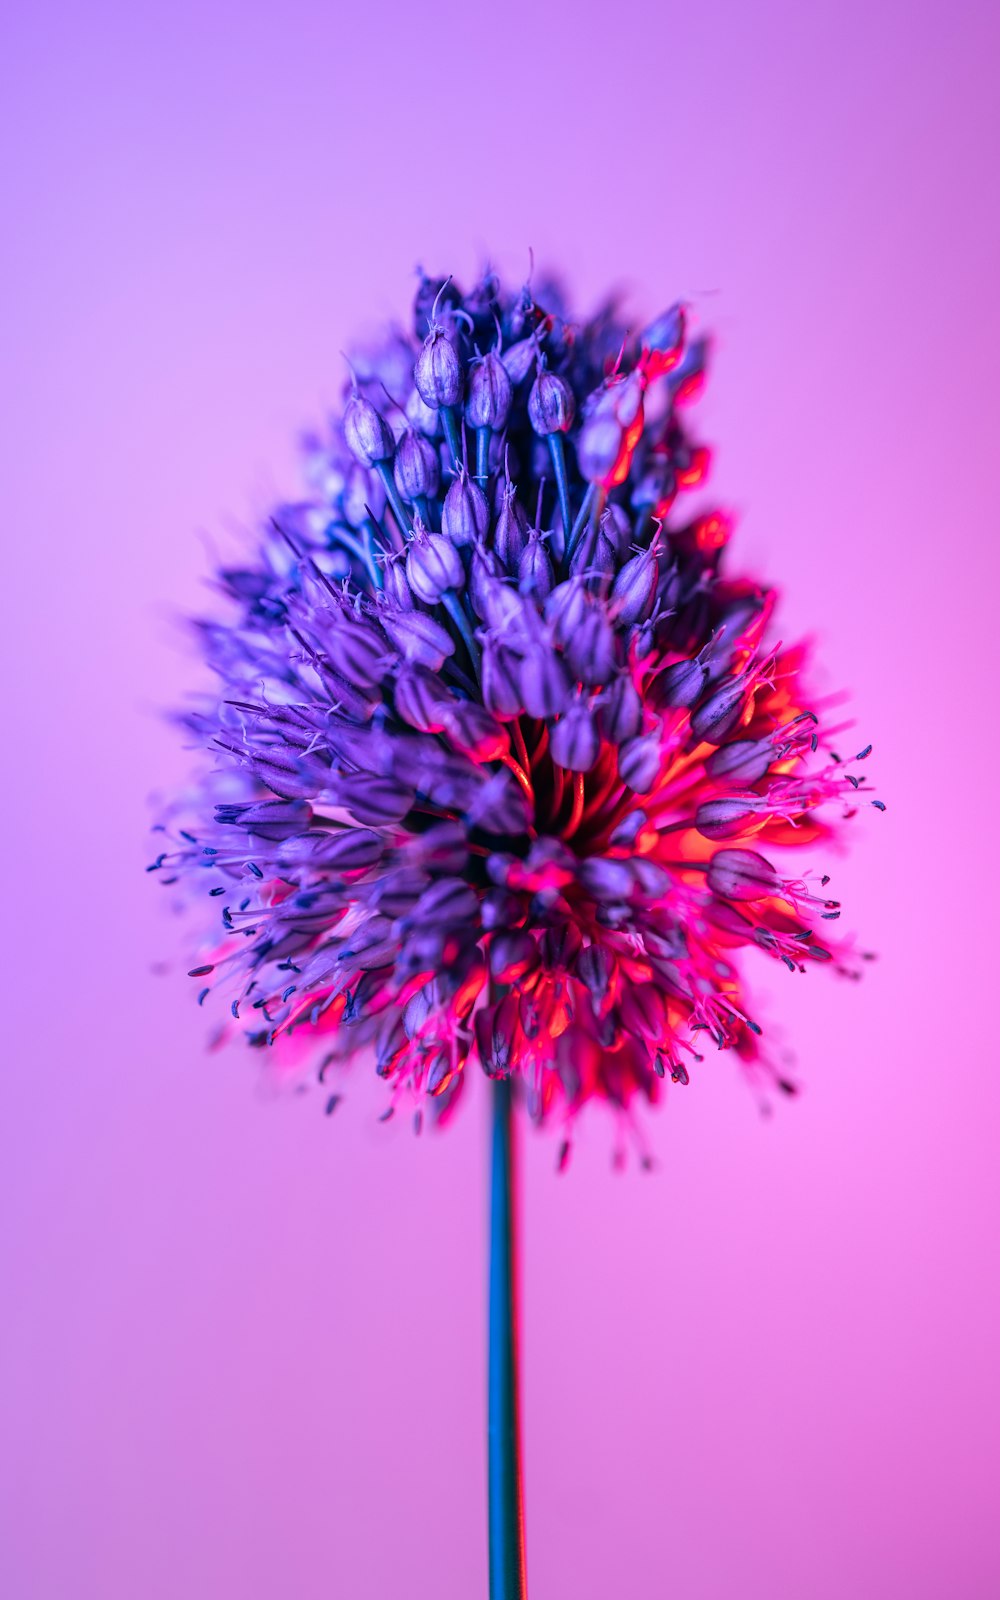 a close up of a purple flower on a pink background